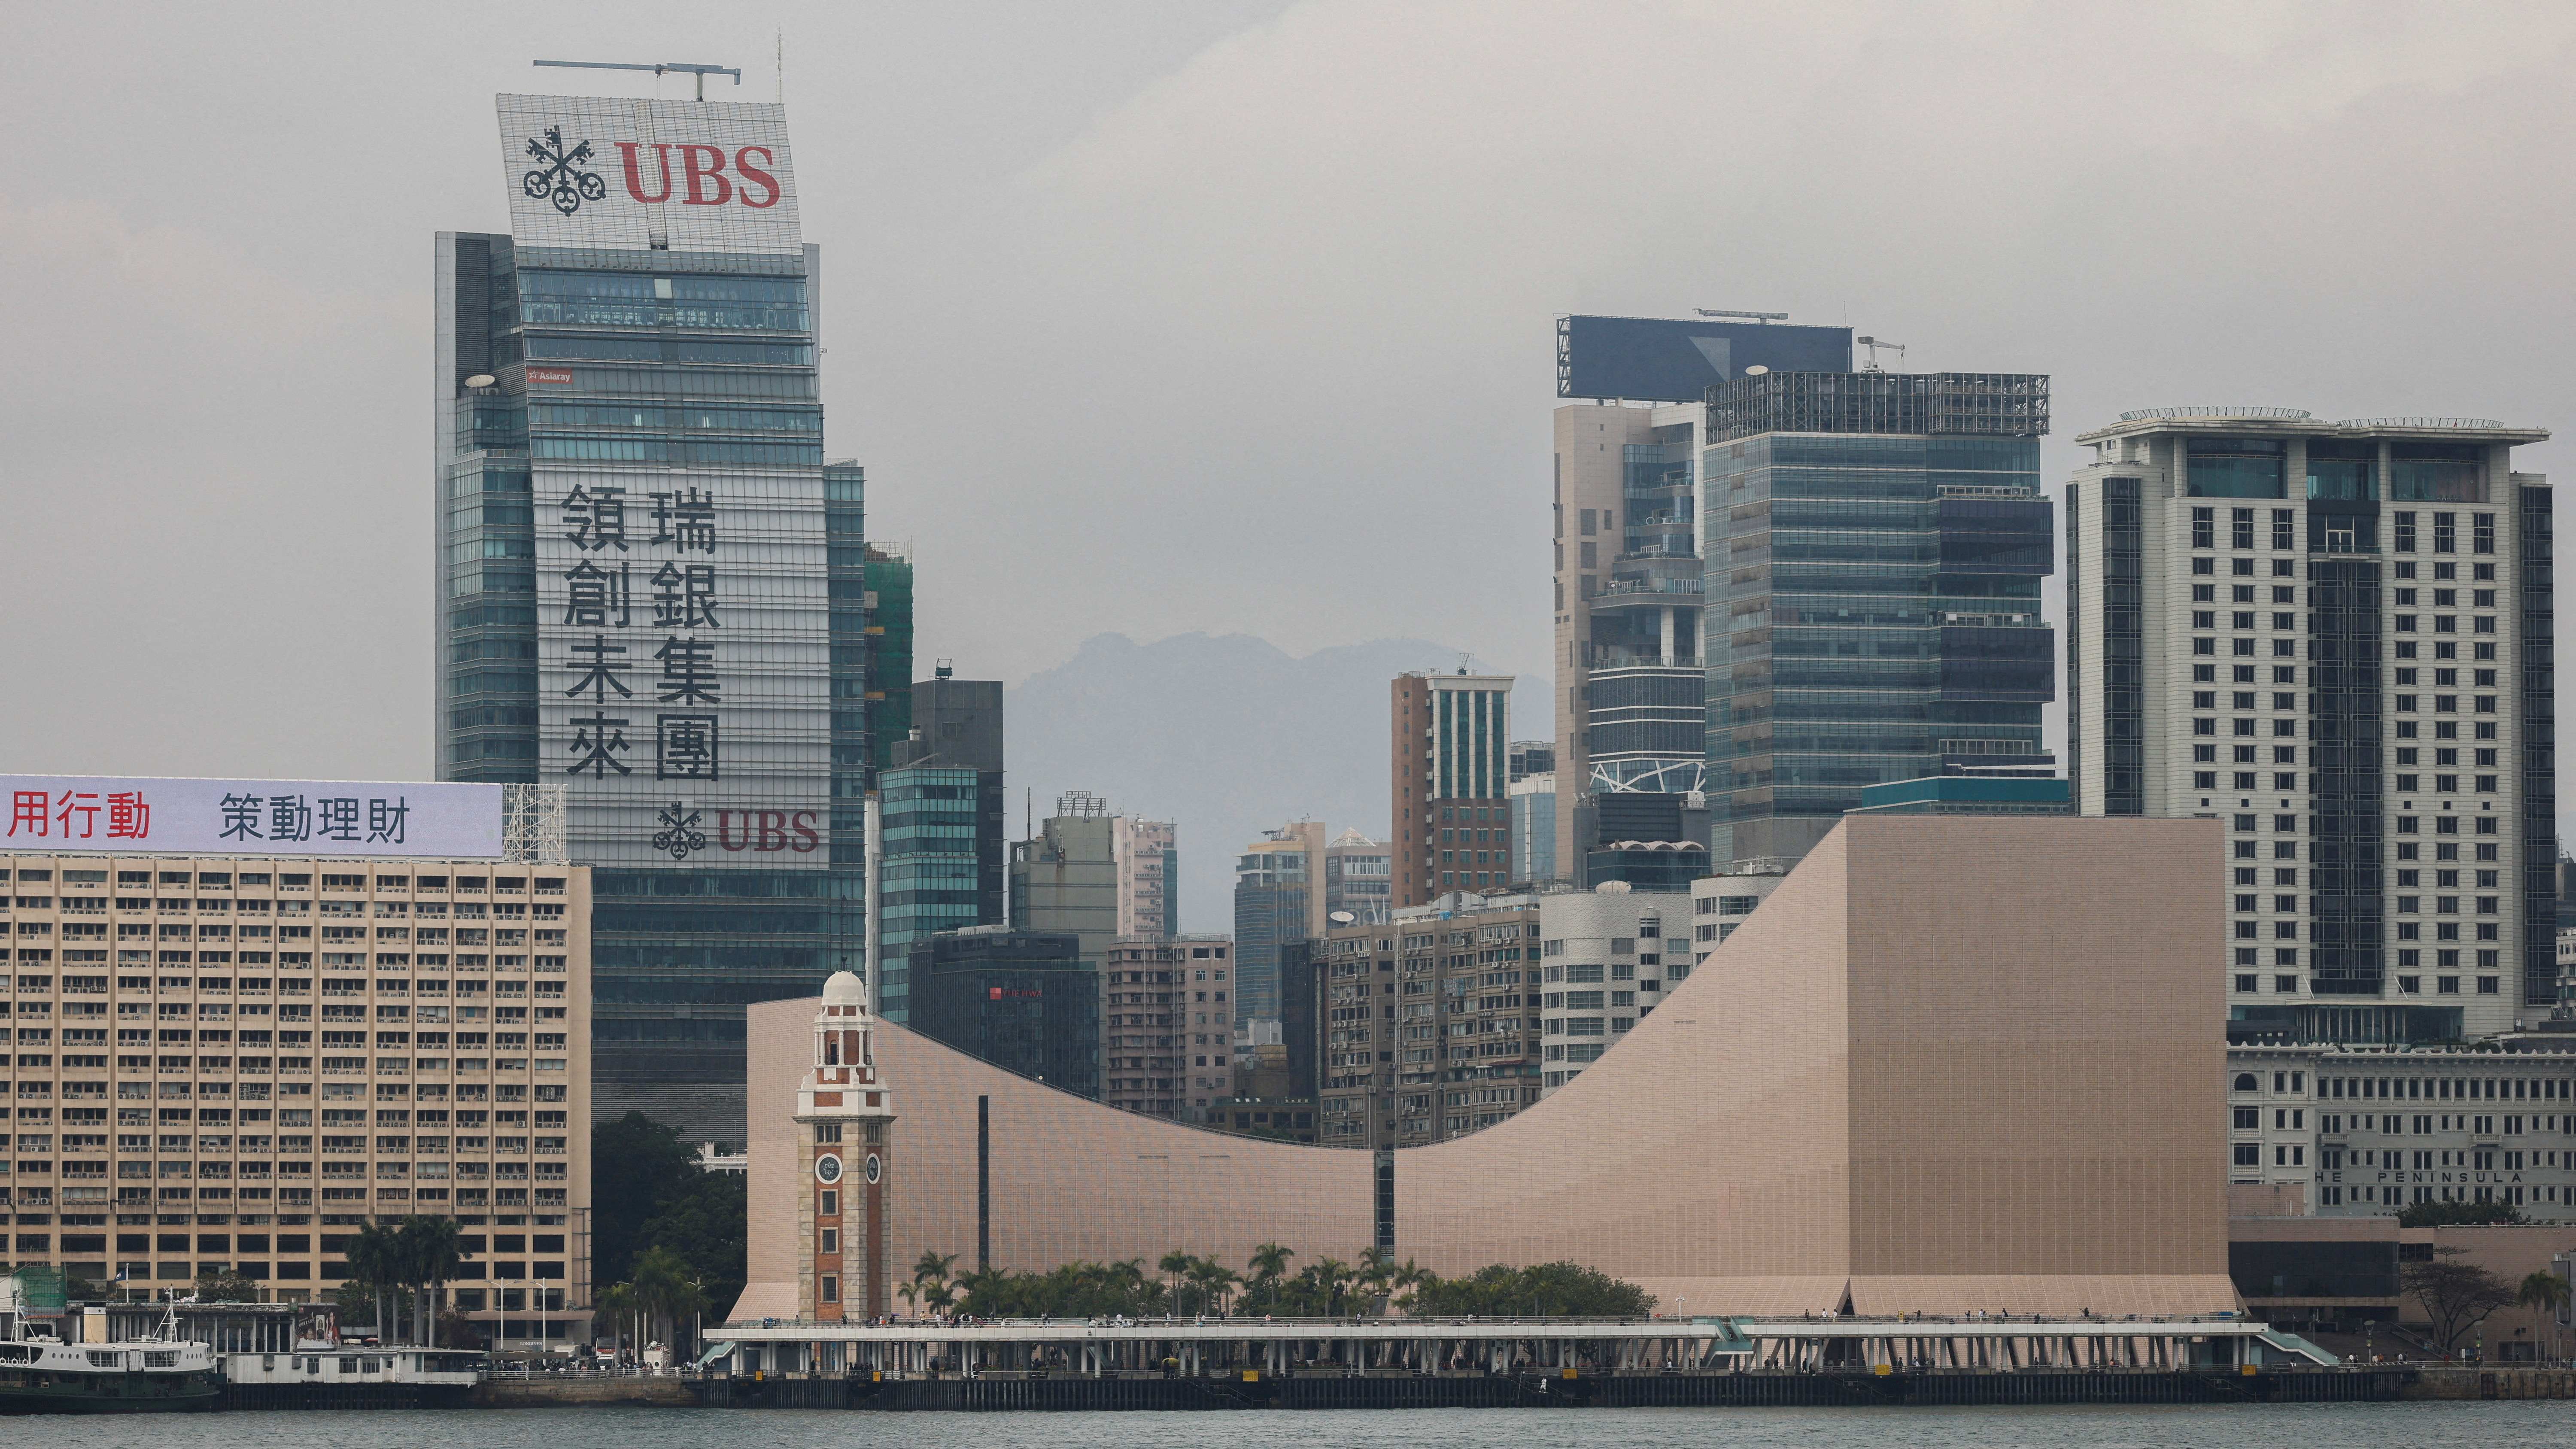 The logo of UBS Group is seen at an office building in Hong Kong